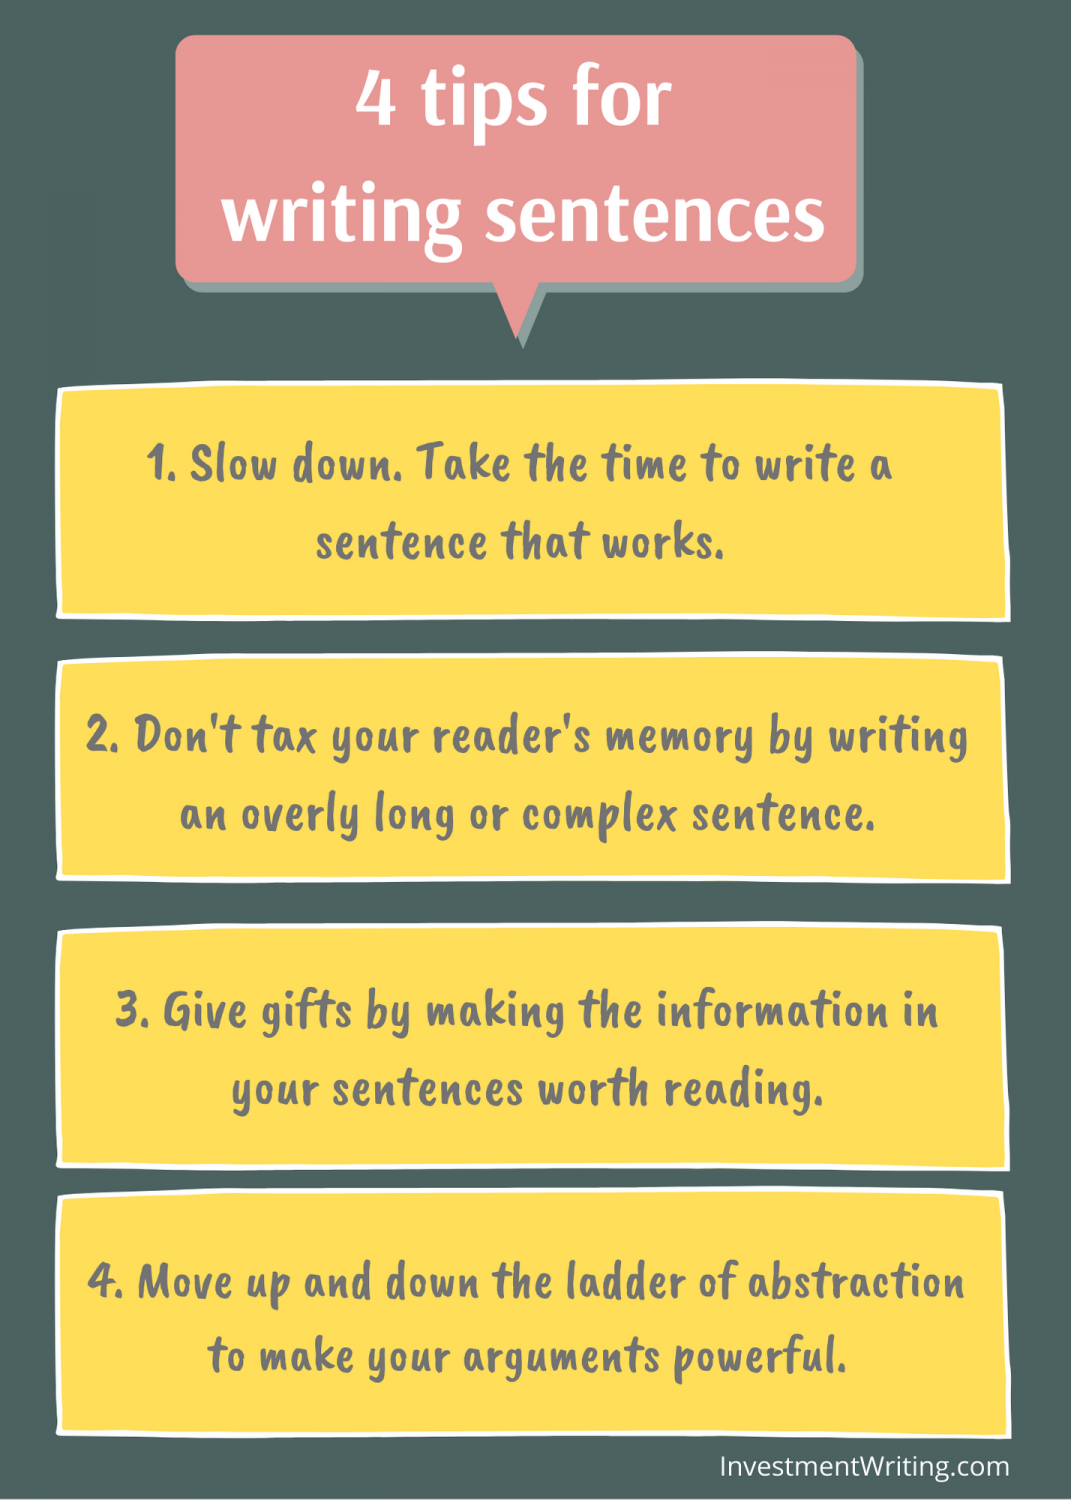 4 Great Tips For Writing Sentences Susan Weiner Investment Writing